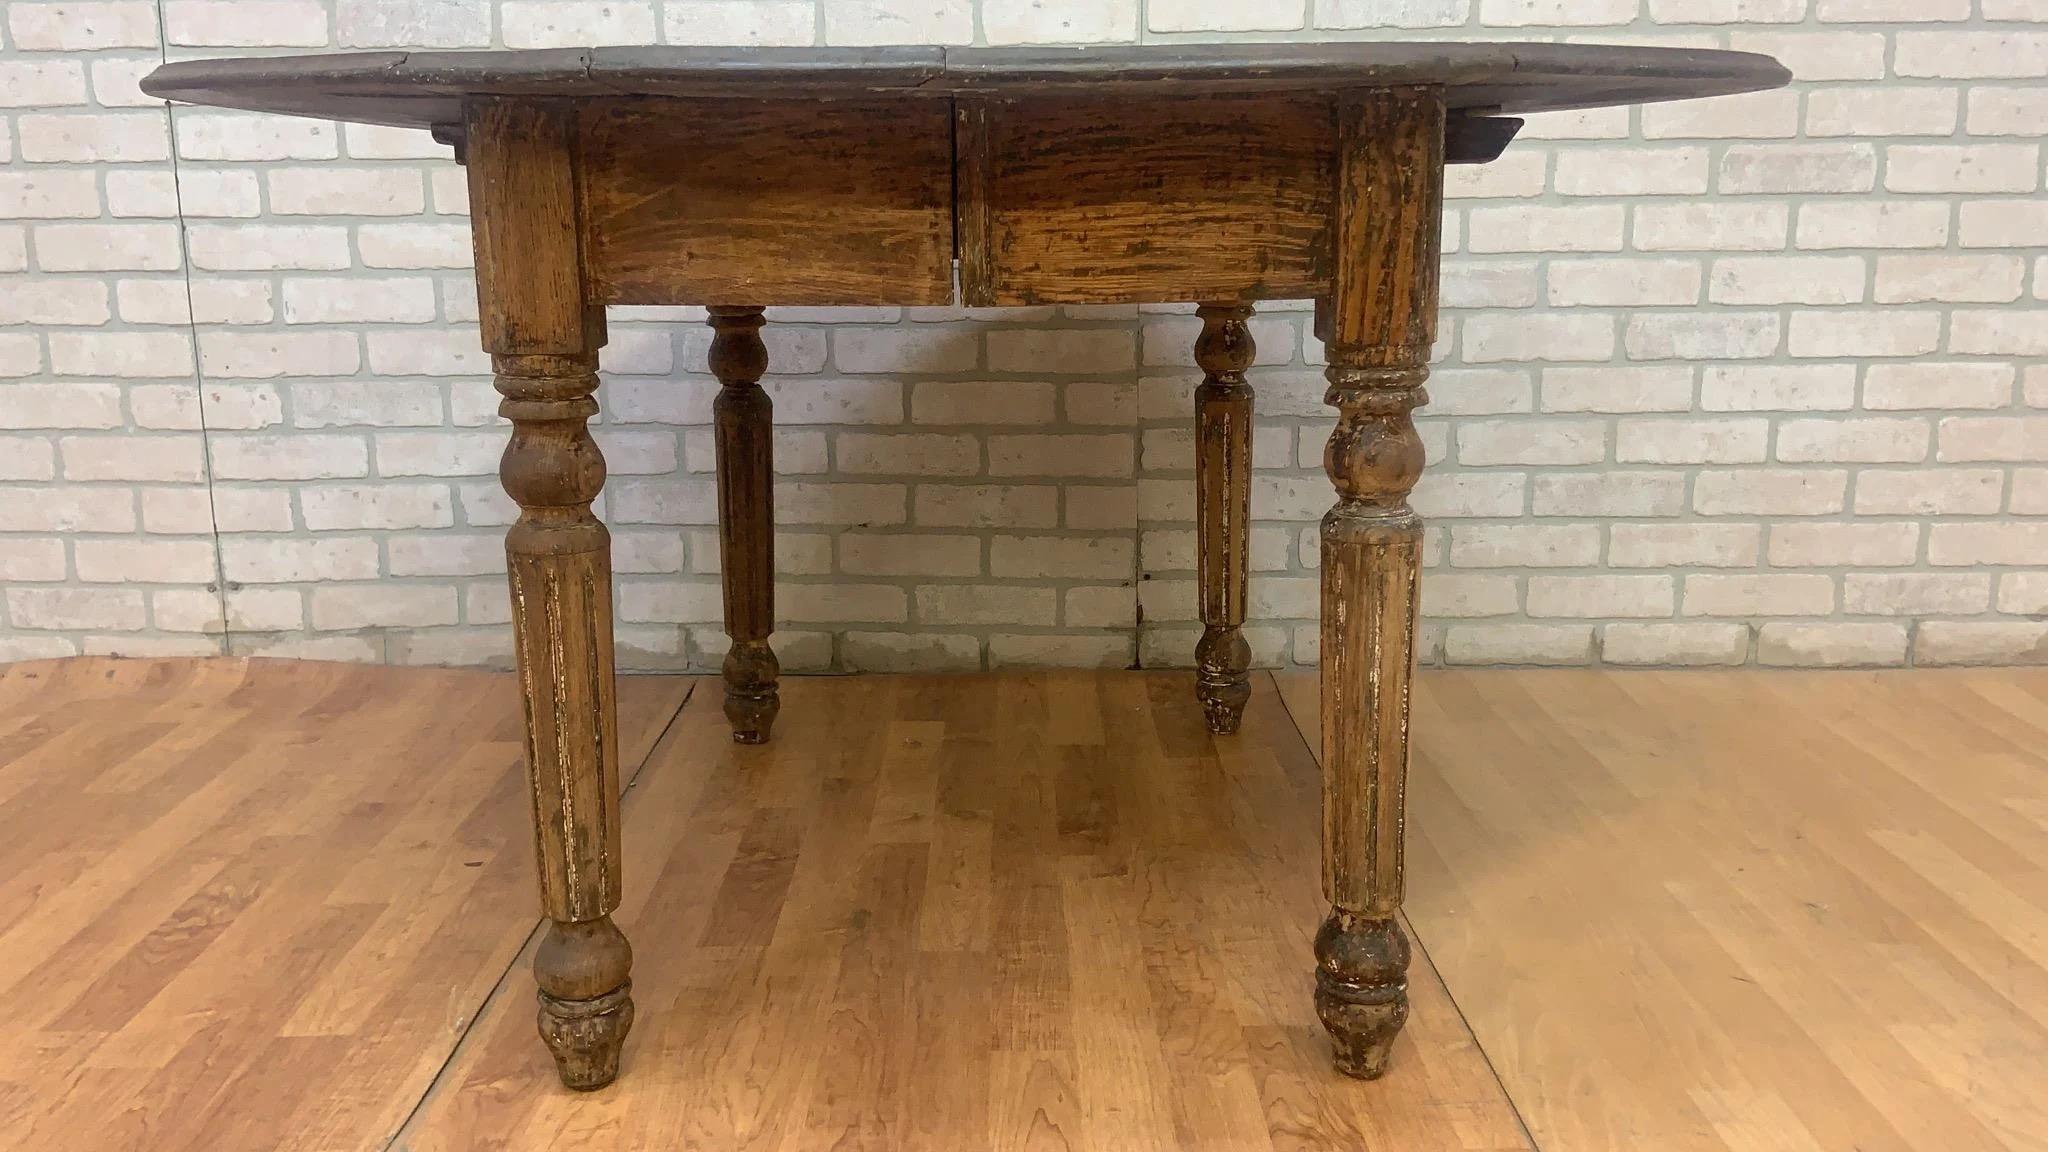 Antique Farmhouse Drop-Leaf Turned Leg Table

This antique farmhouse drop-leaf table boasts a classic design with turned legs and wooden bars enabling easy adjustment of its sides. The table showcases desired wear on the legs and apron, while the